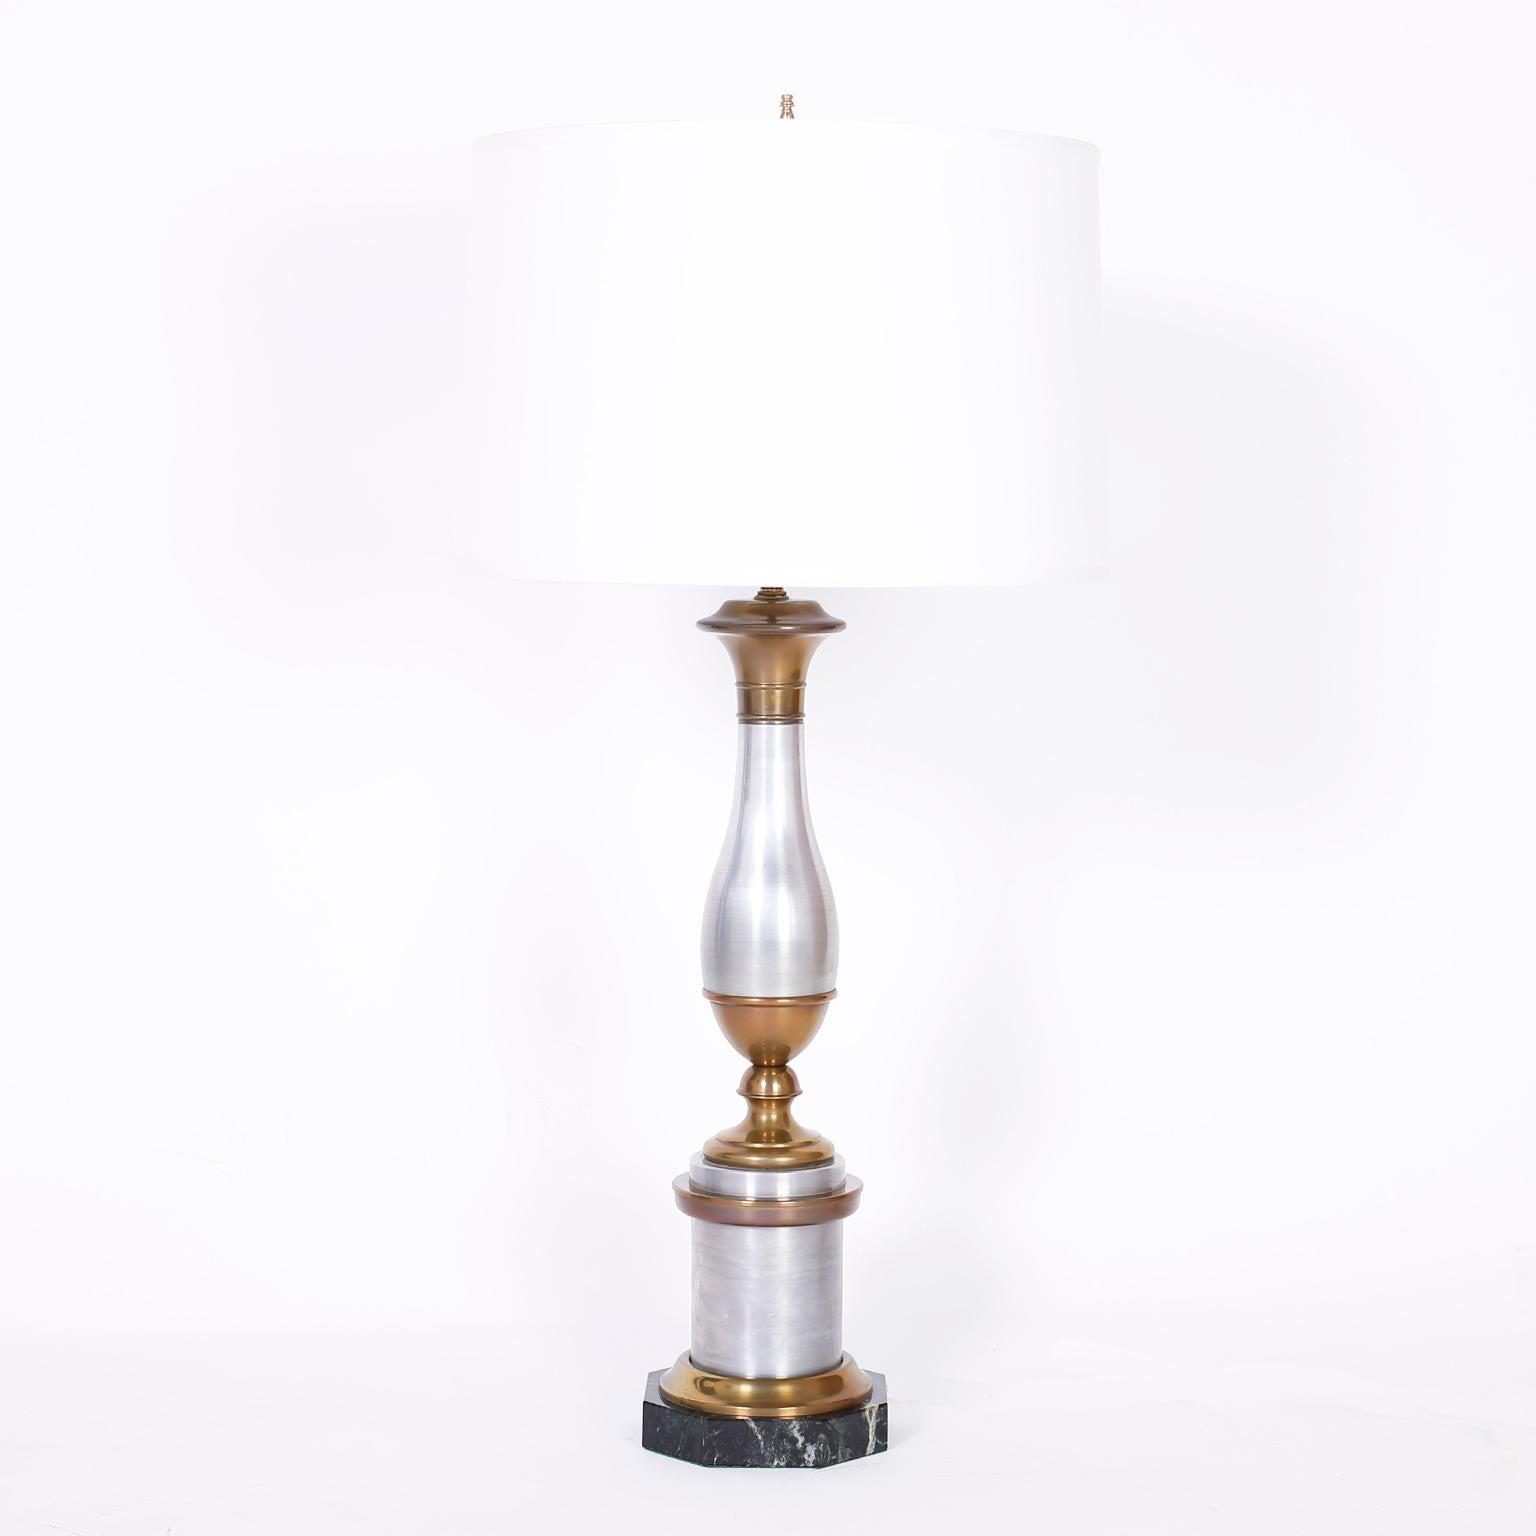 Impressive pair of neoclassic style table lamps crafted in brass and brushed aluminum on an octagon black marble base.